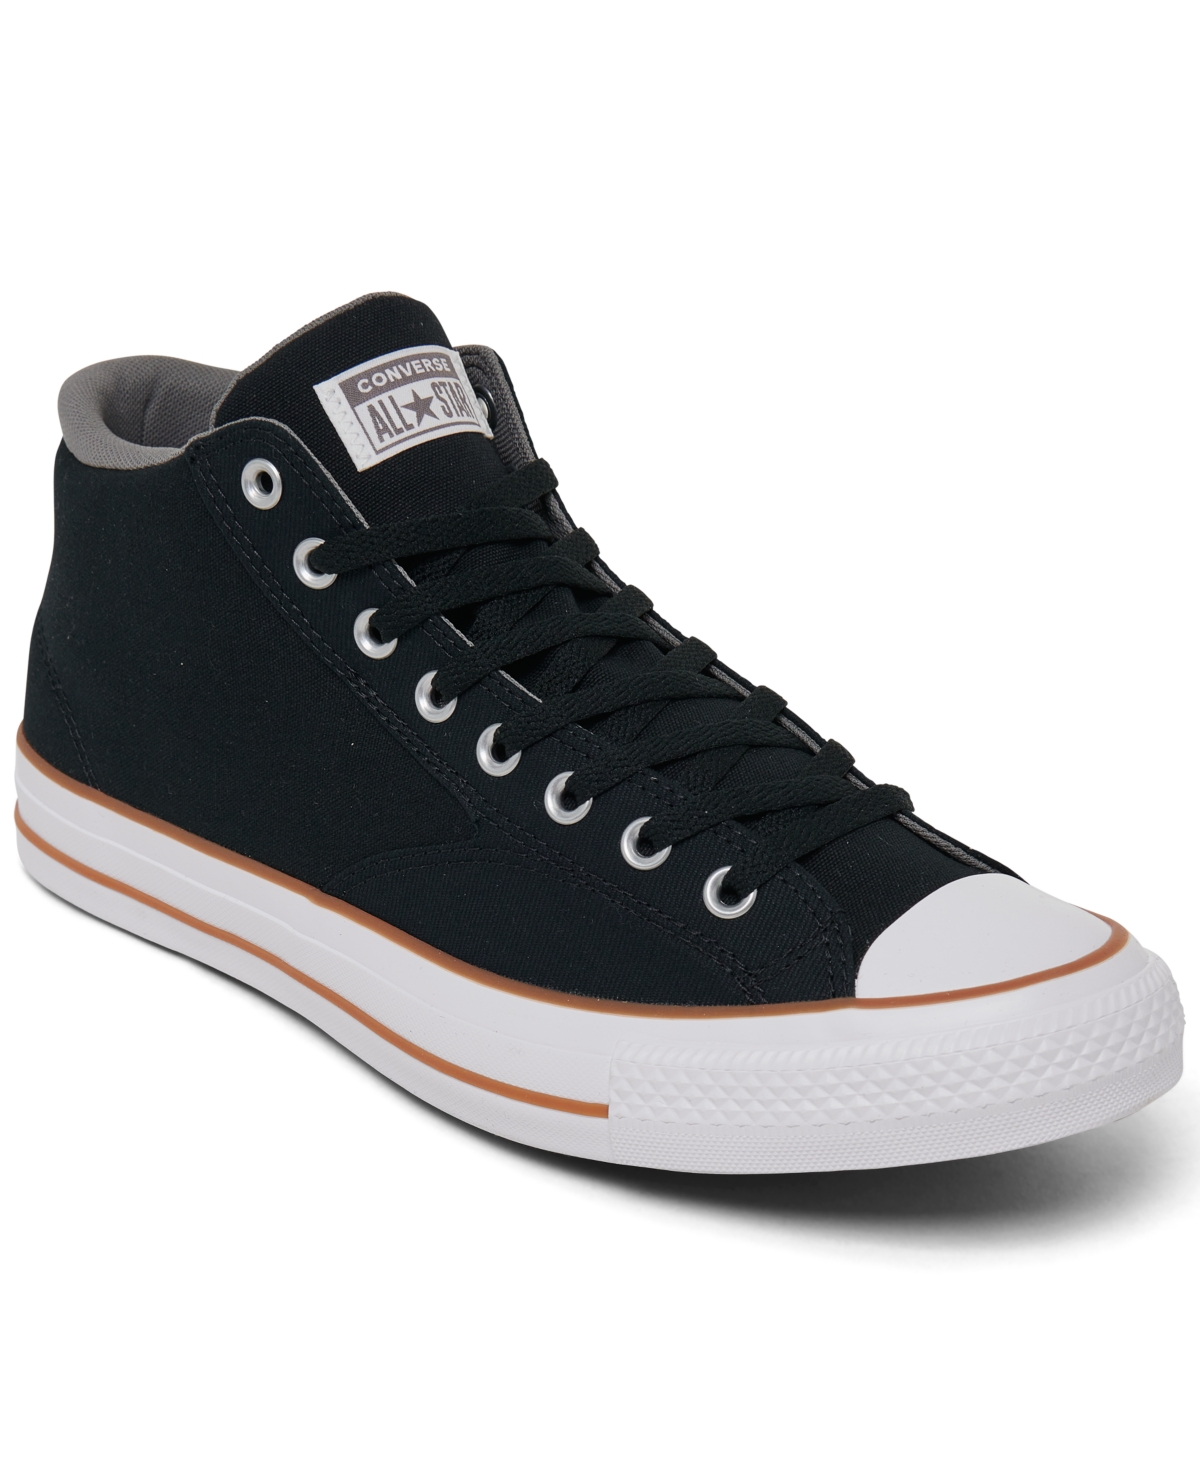 Men's Casual Sneakers from Finish Line - Black